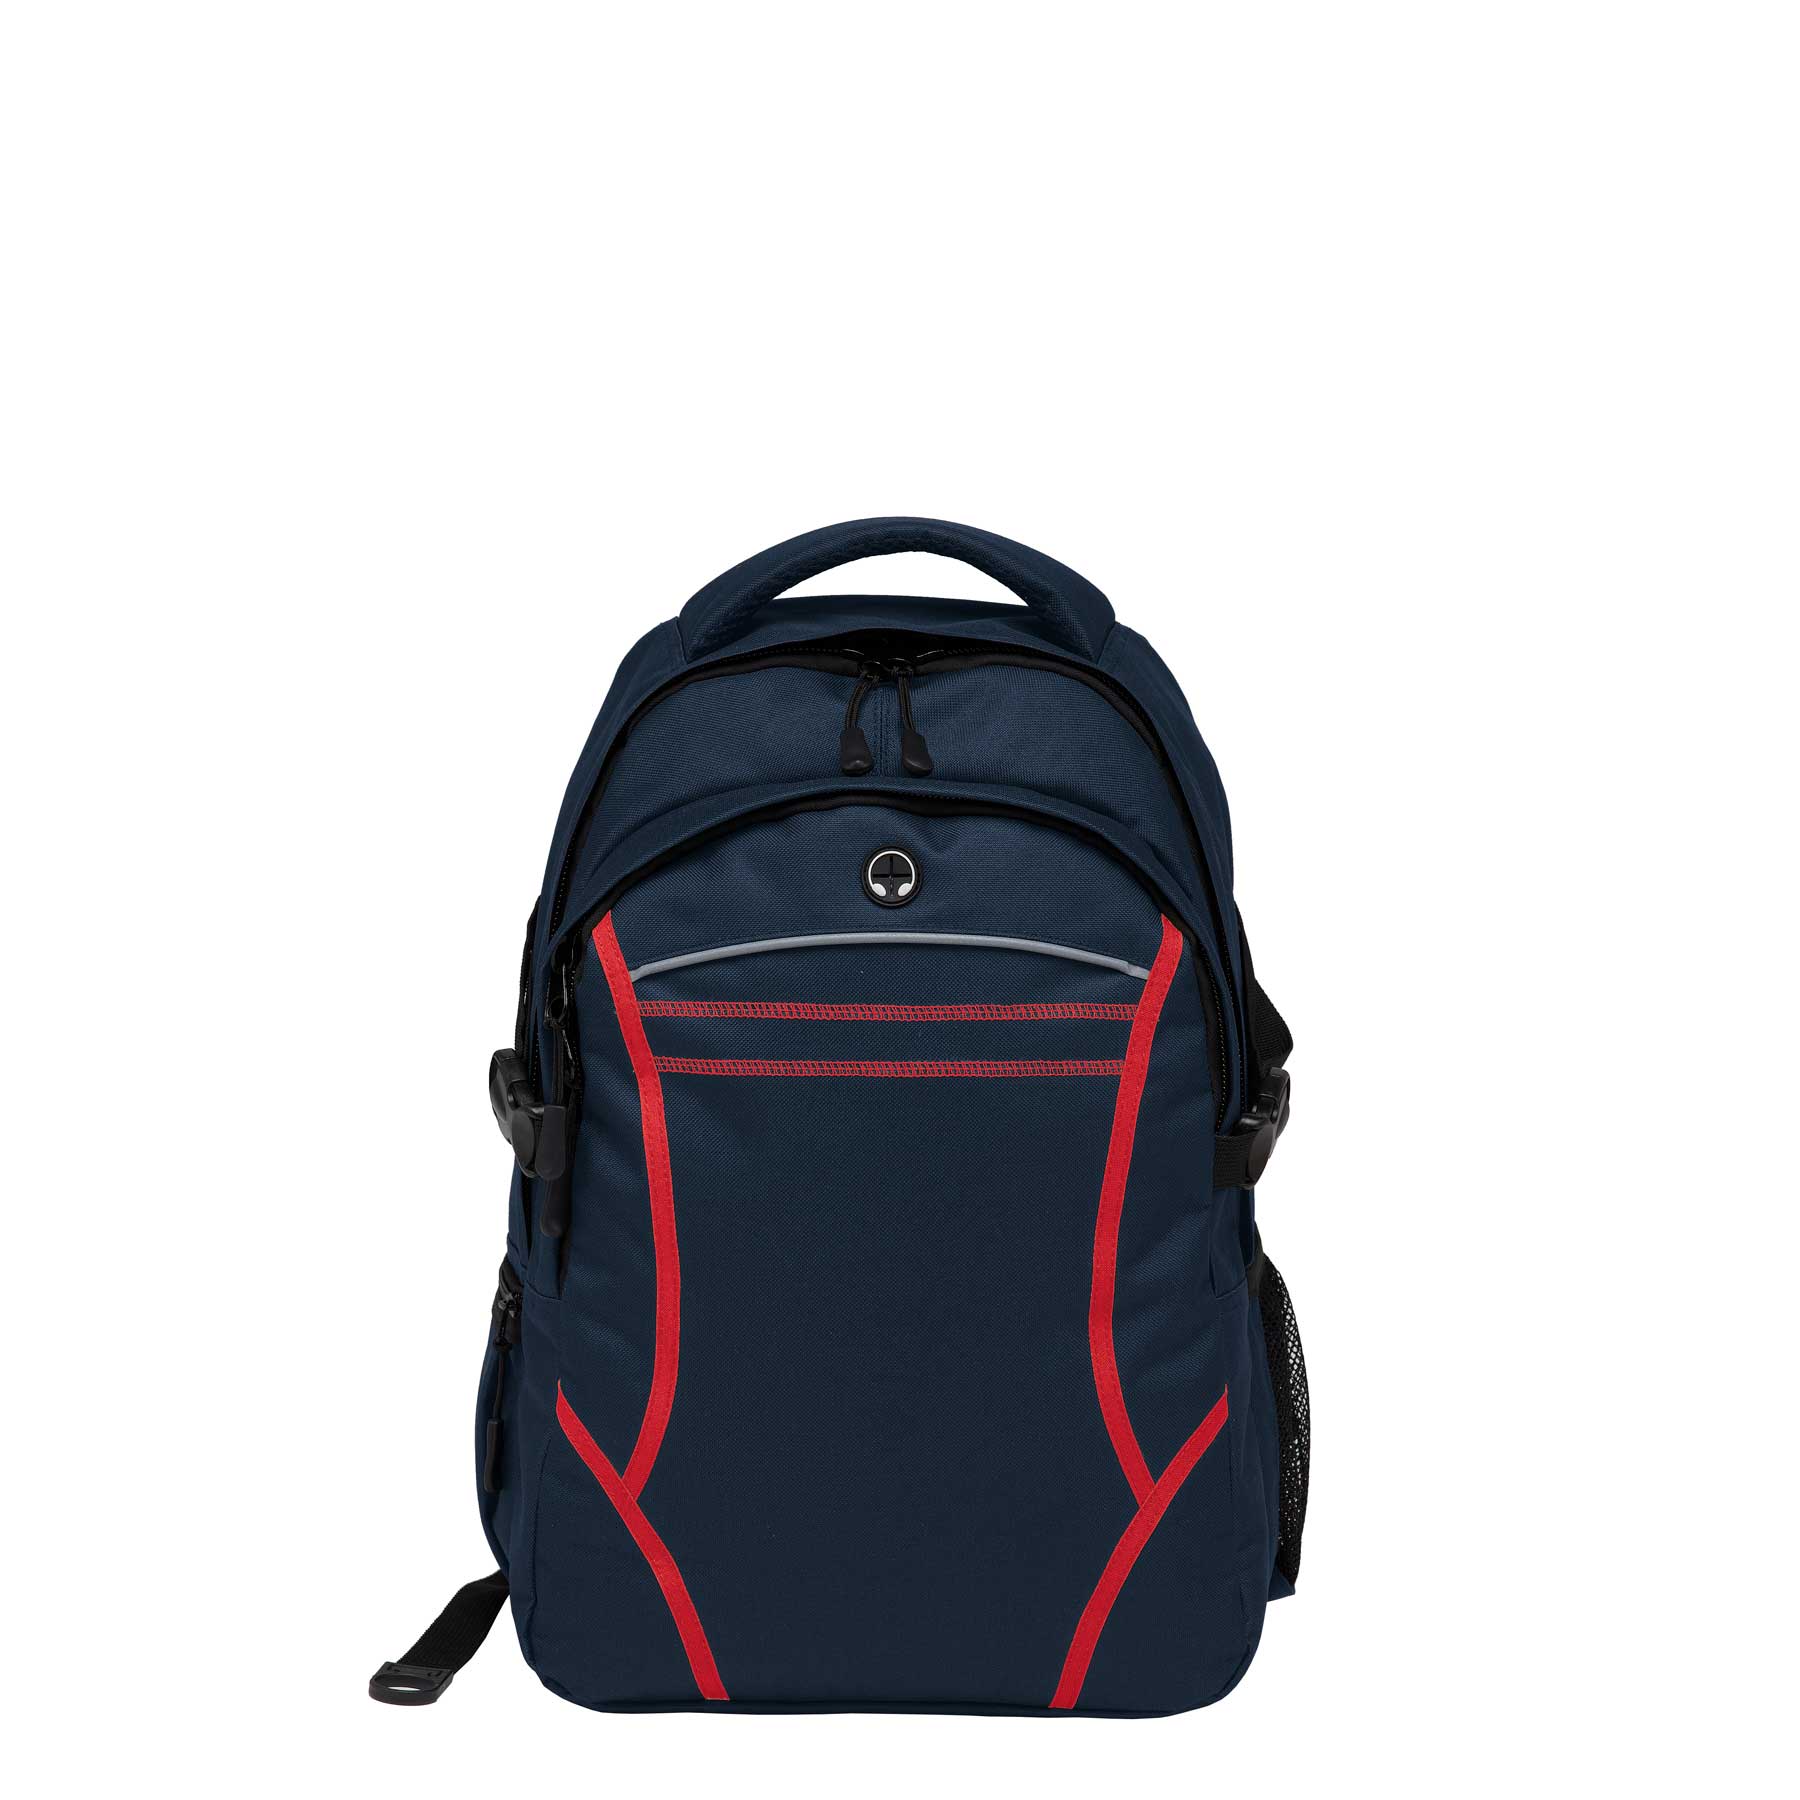 Reflex Backpack | Gear For Life